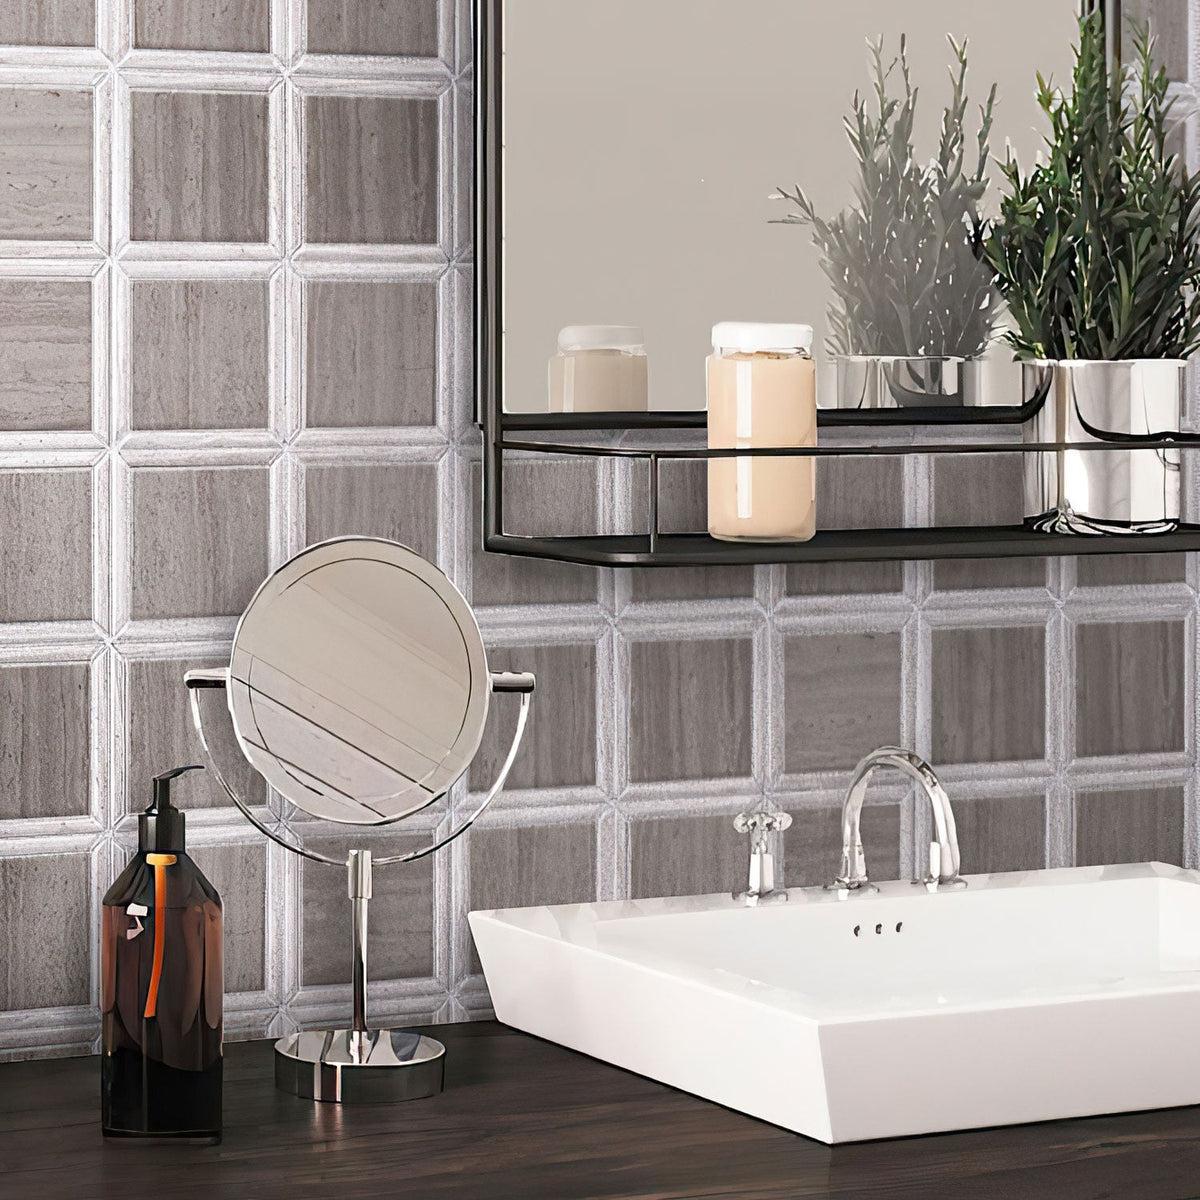 Wash Basin on background of Geo Square Wooden Beige Marble Mosaic Tile Wall